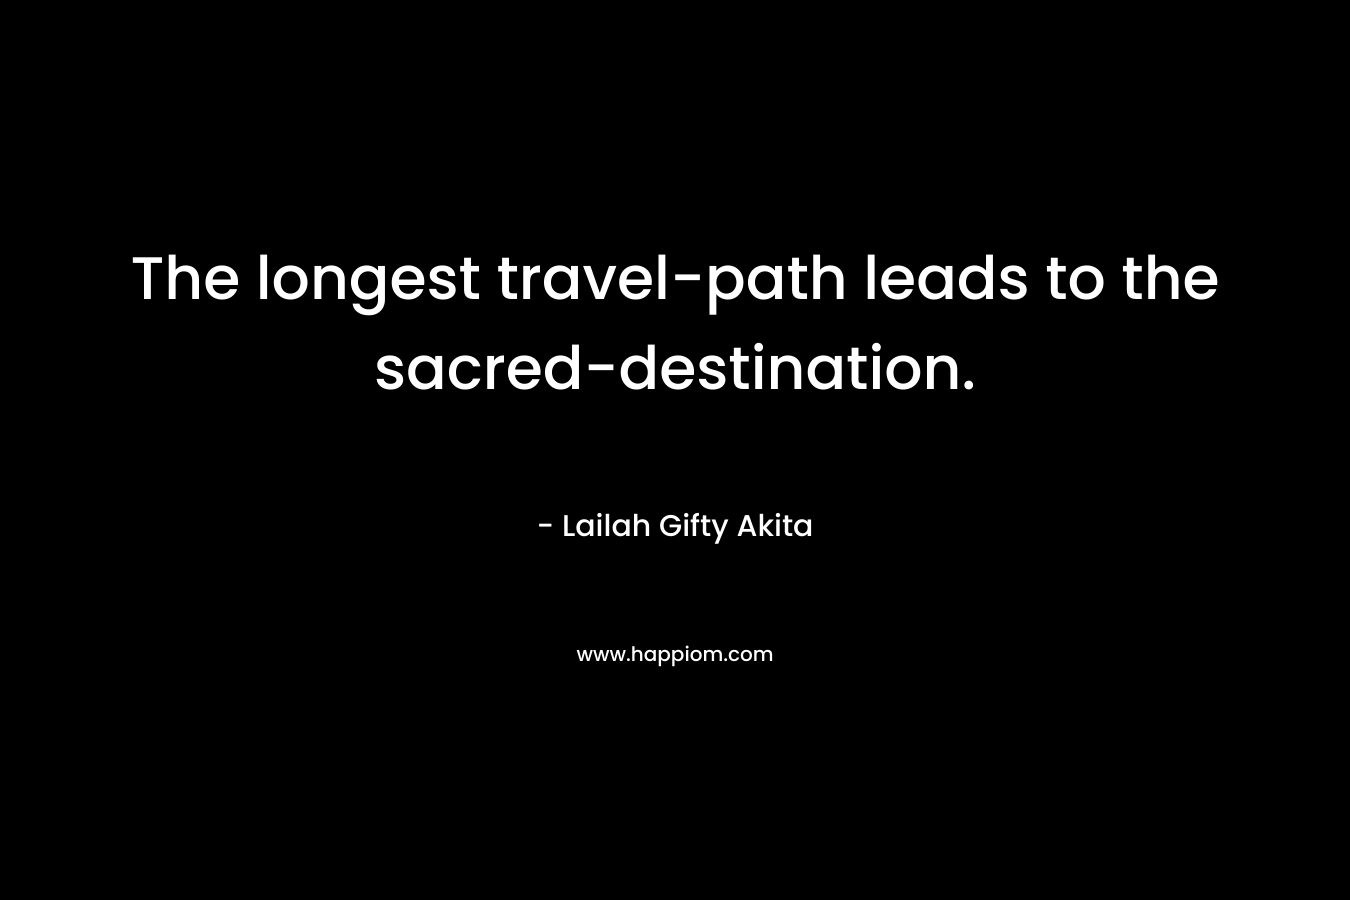 The longest travel-path leads to the sacred-destination.